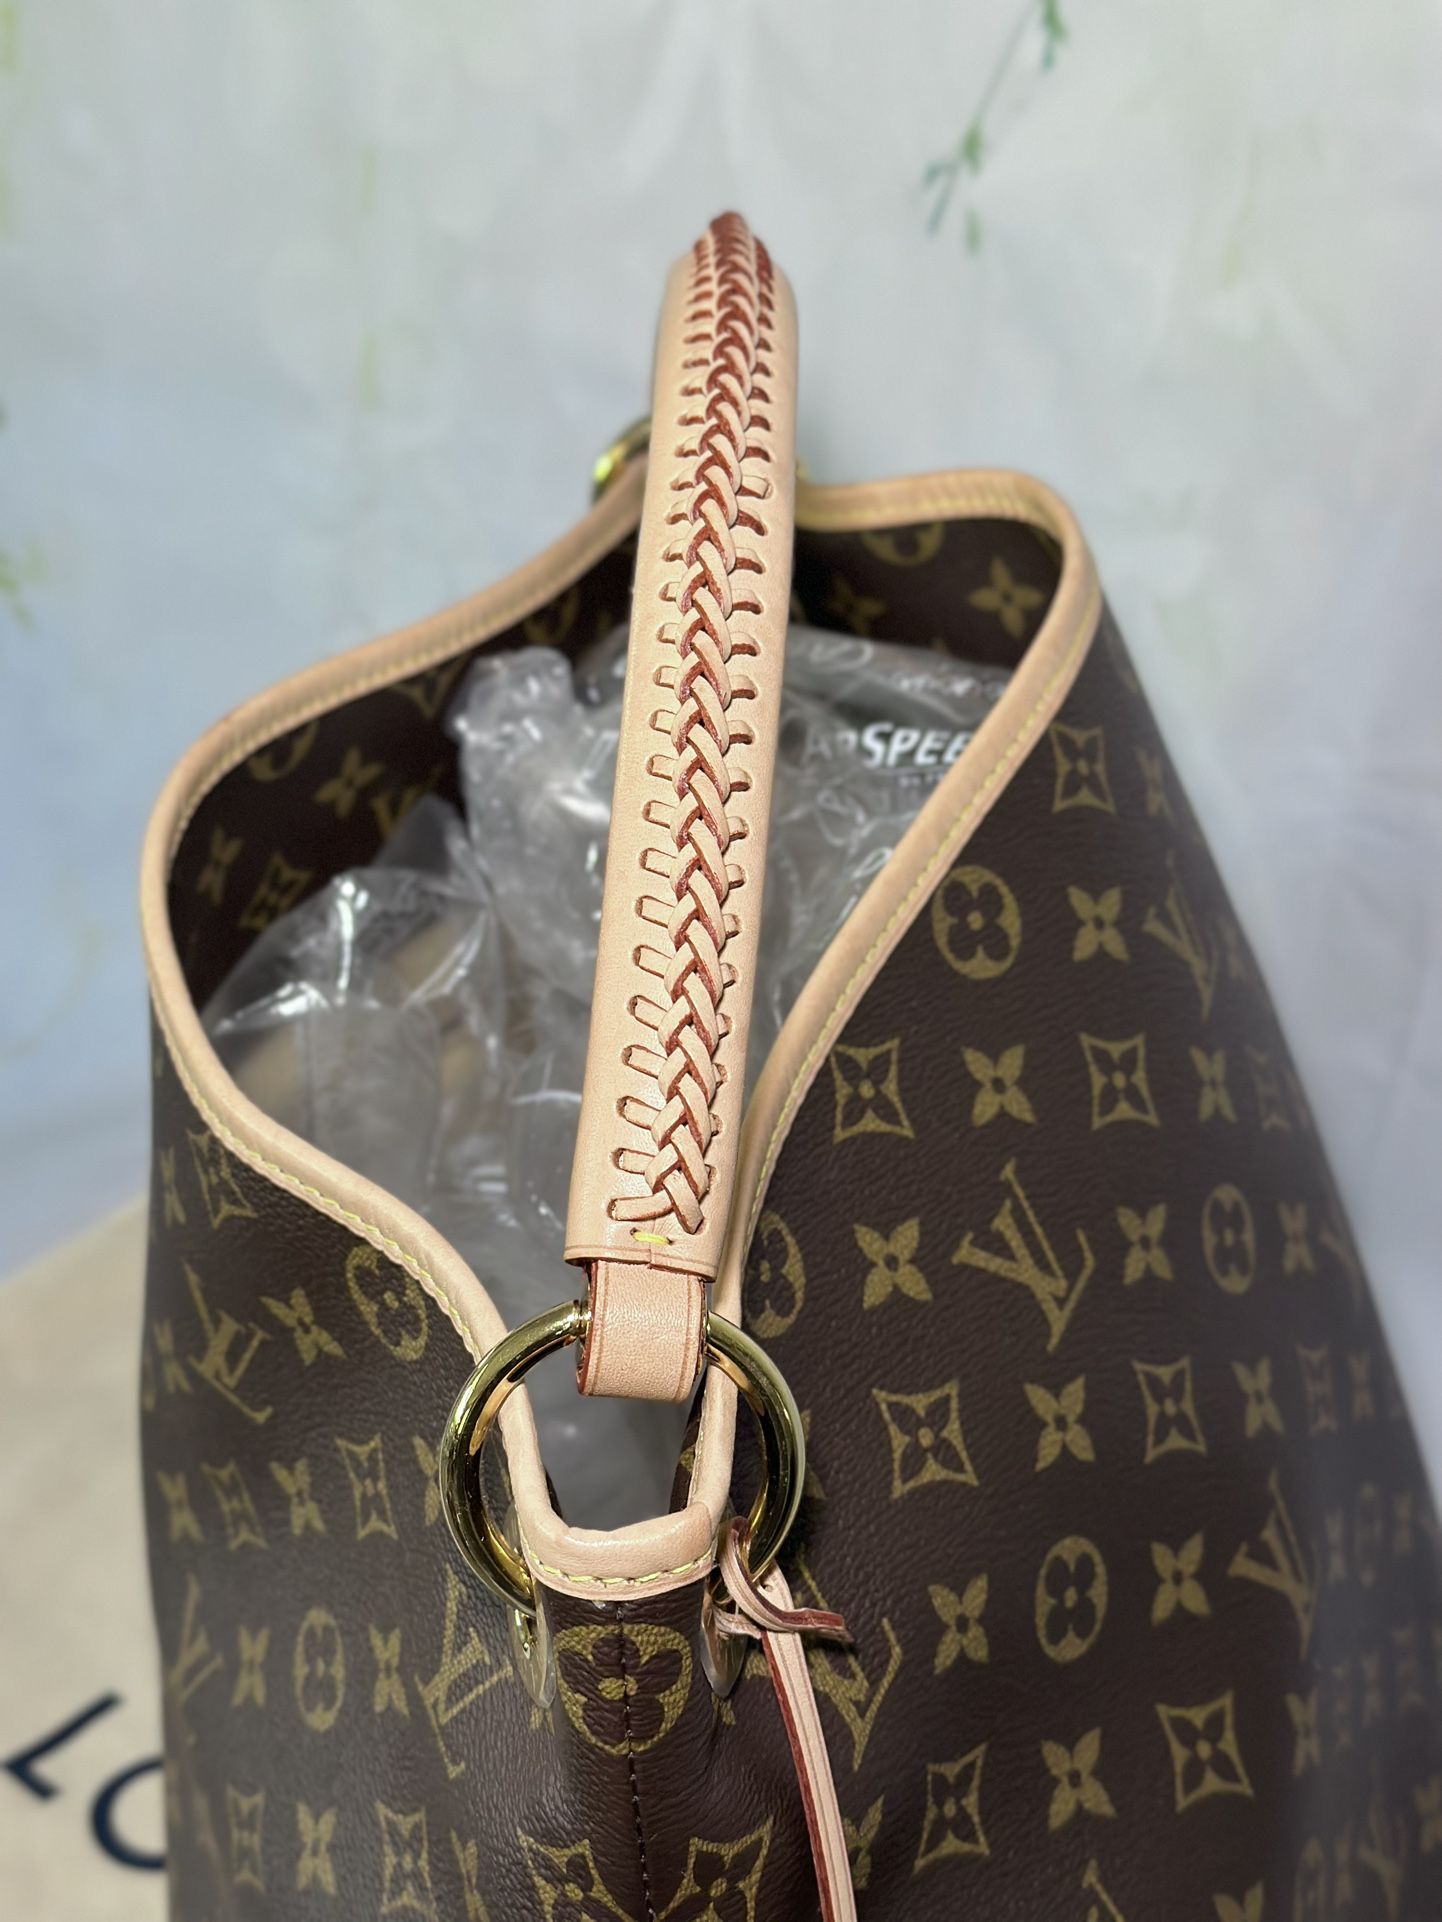 Artsy Mm Authentic Louis Vuitton Perfect Condition for Sale in Galt, CA -  OfferUp